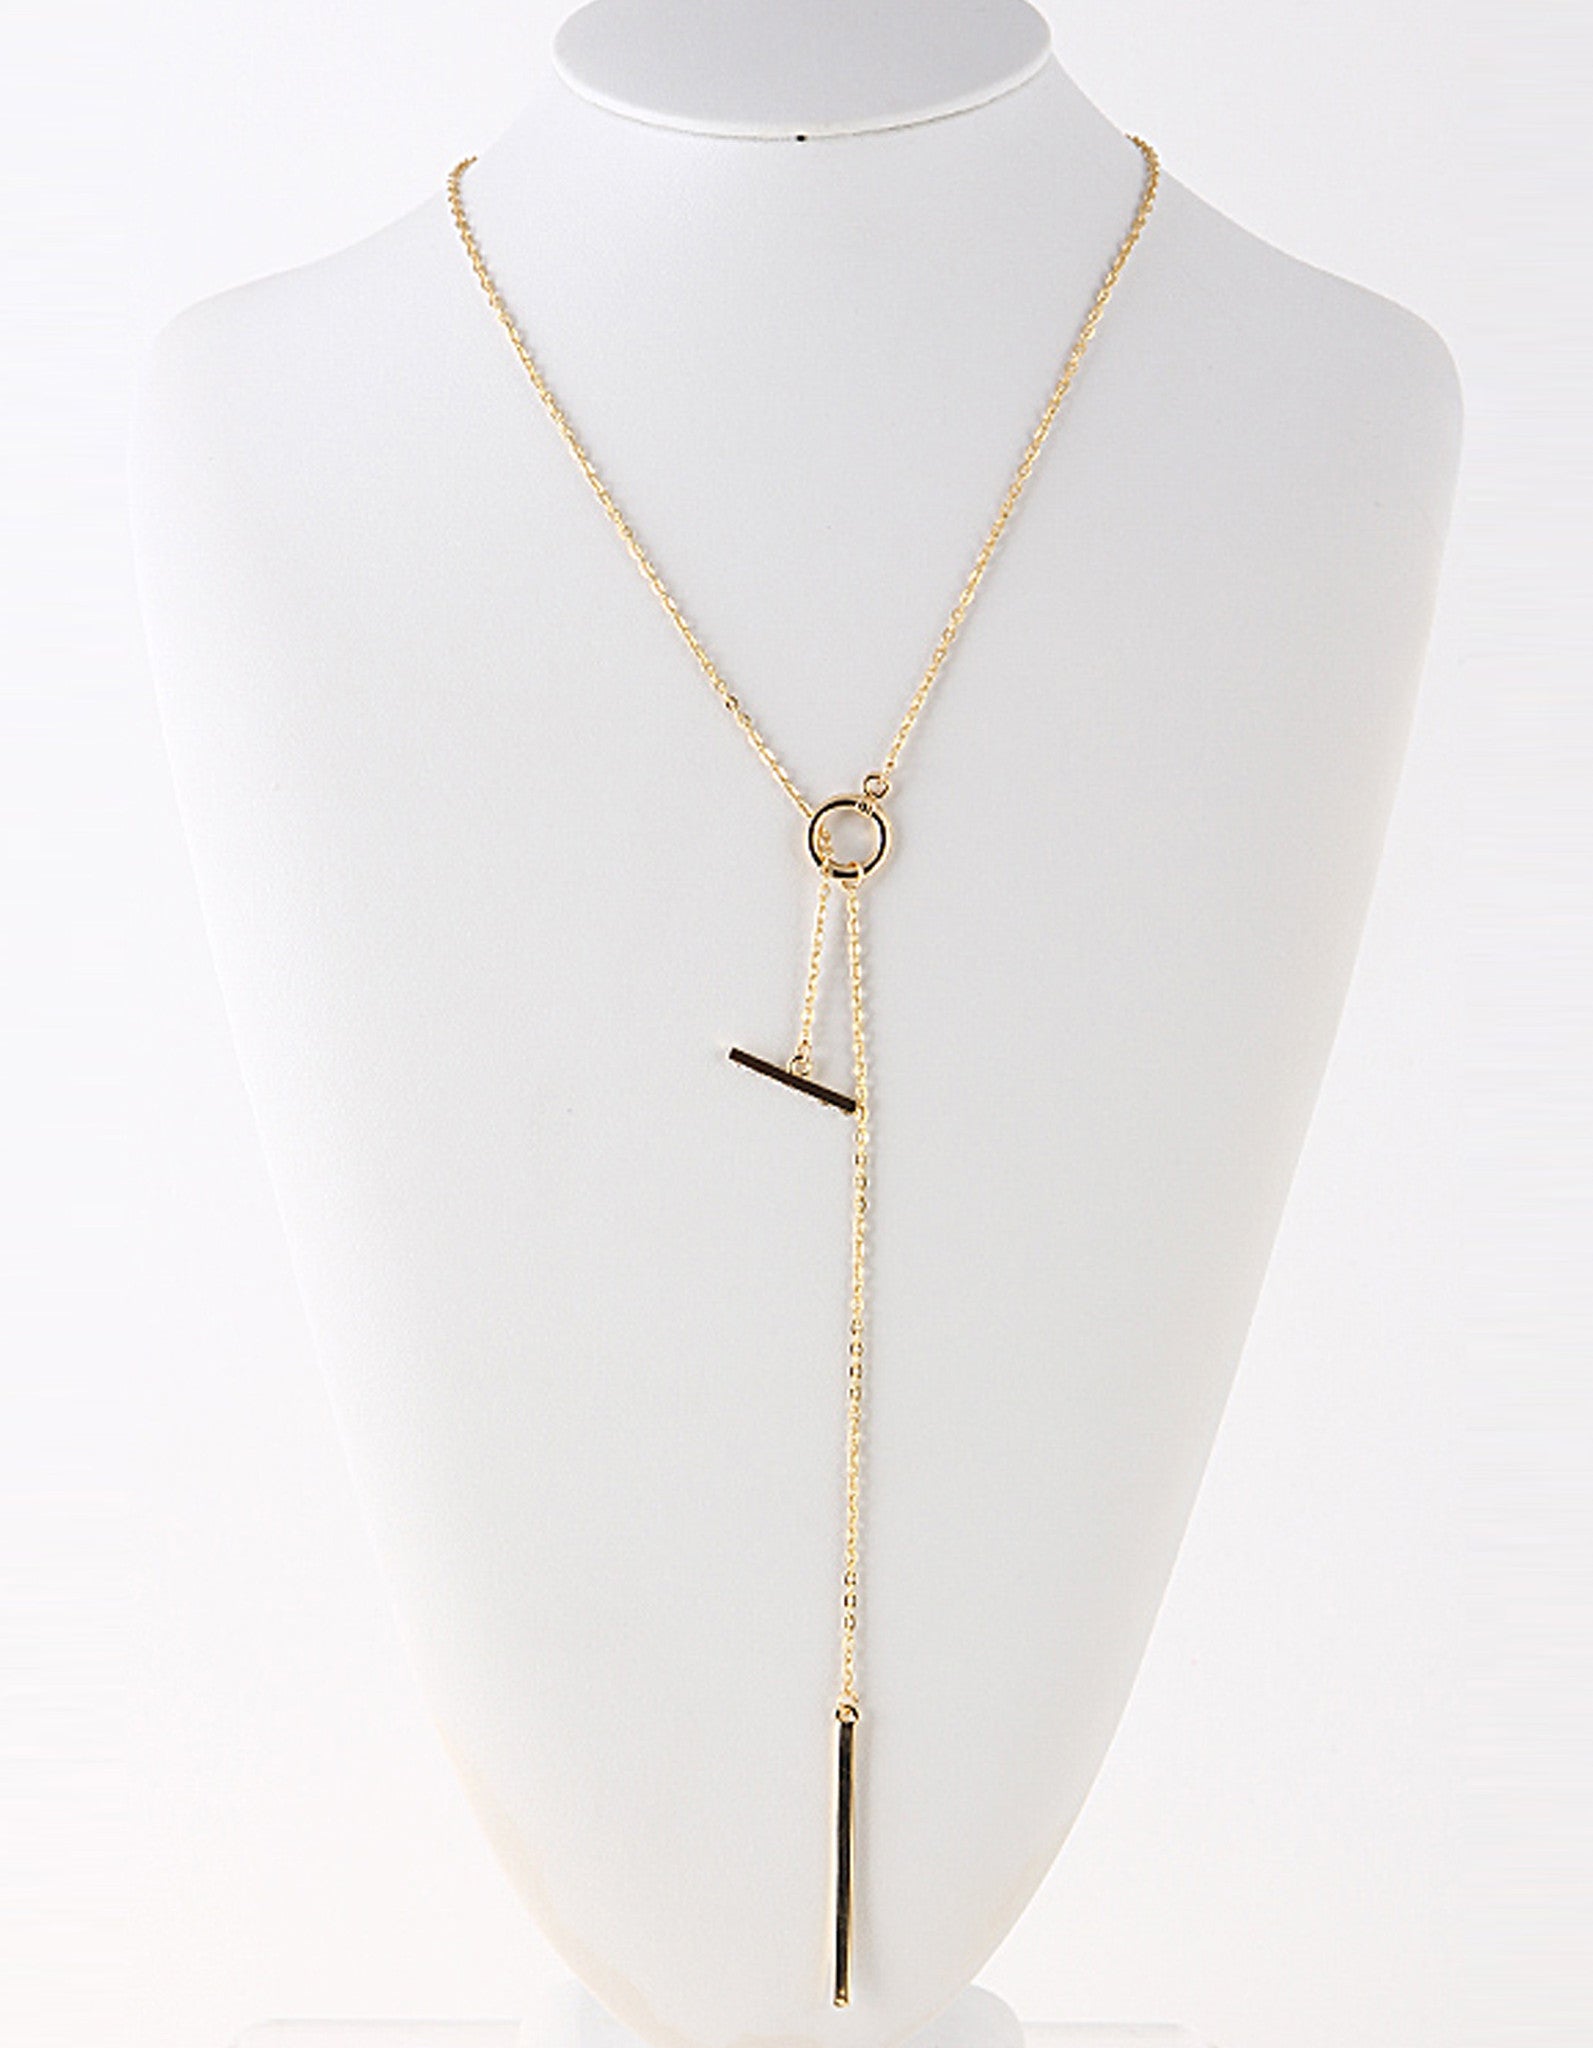 Gold and Rhinestone Bar Necklace